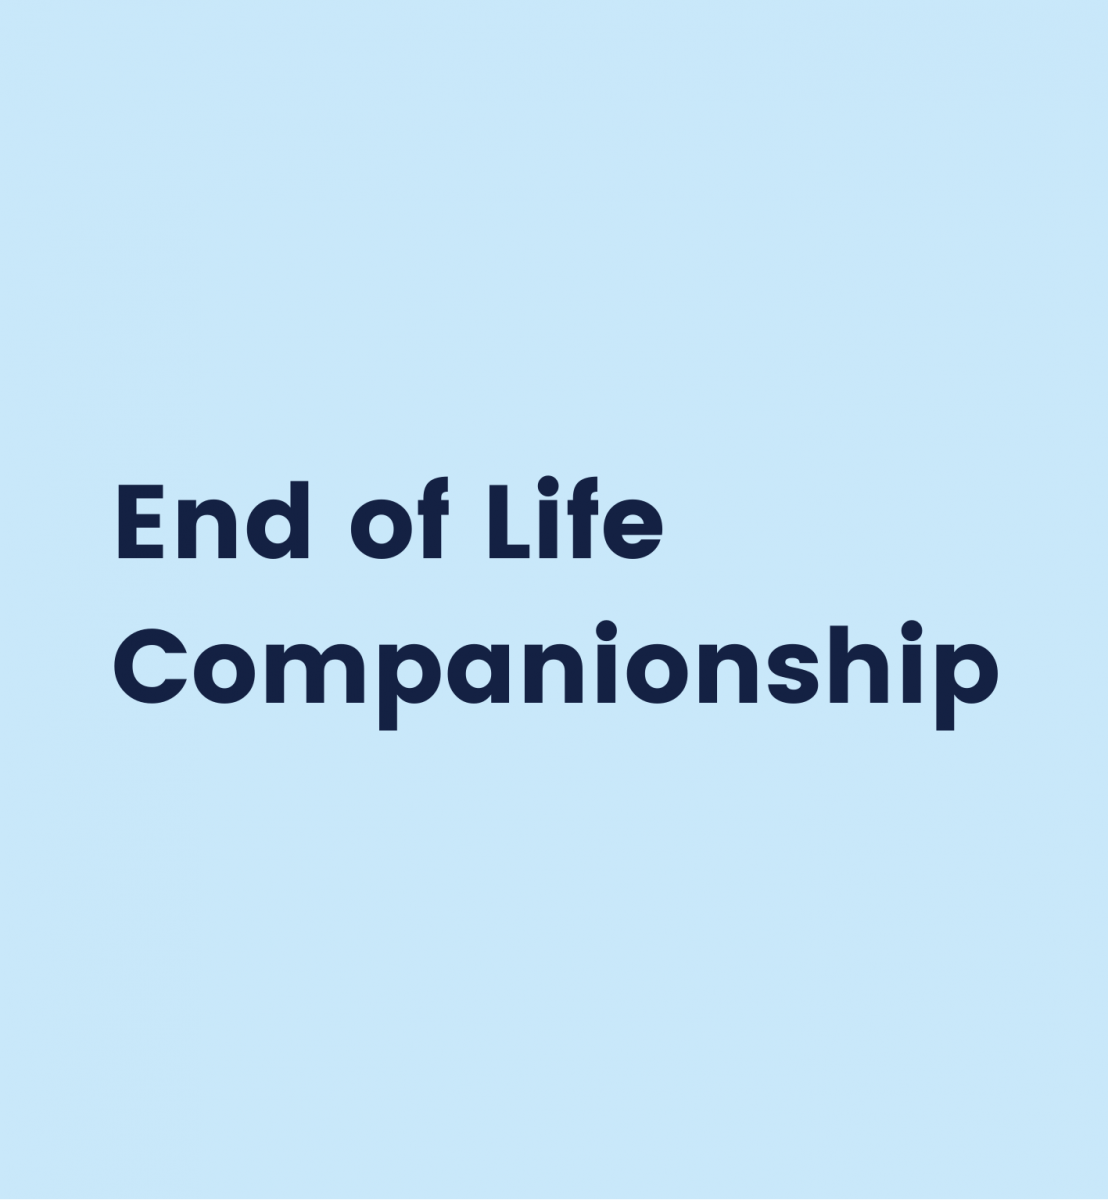 Tab to click on to read more on End of Life Companionship